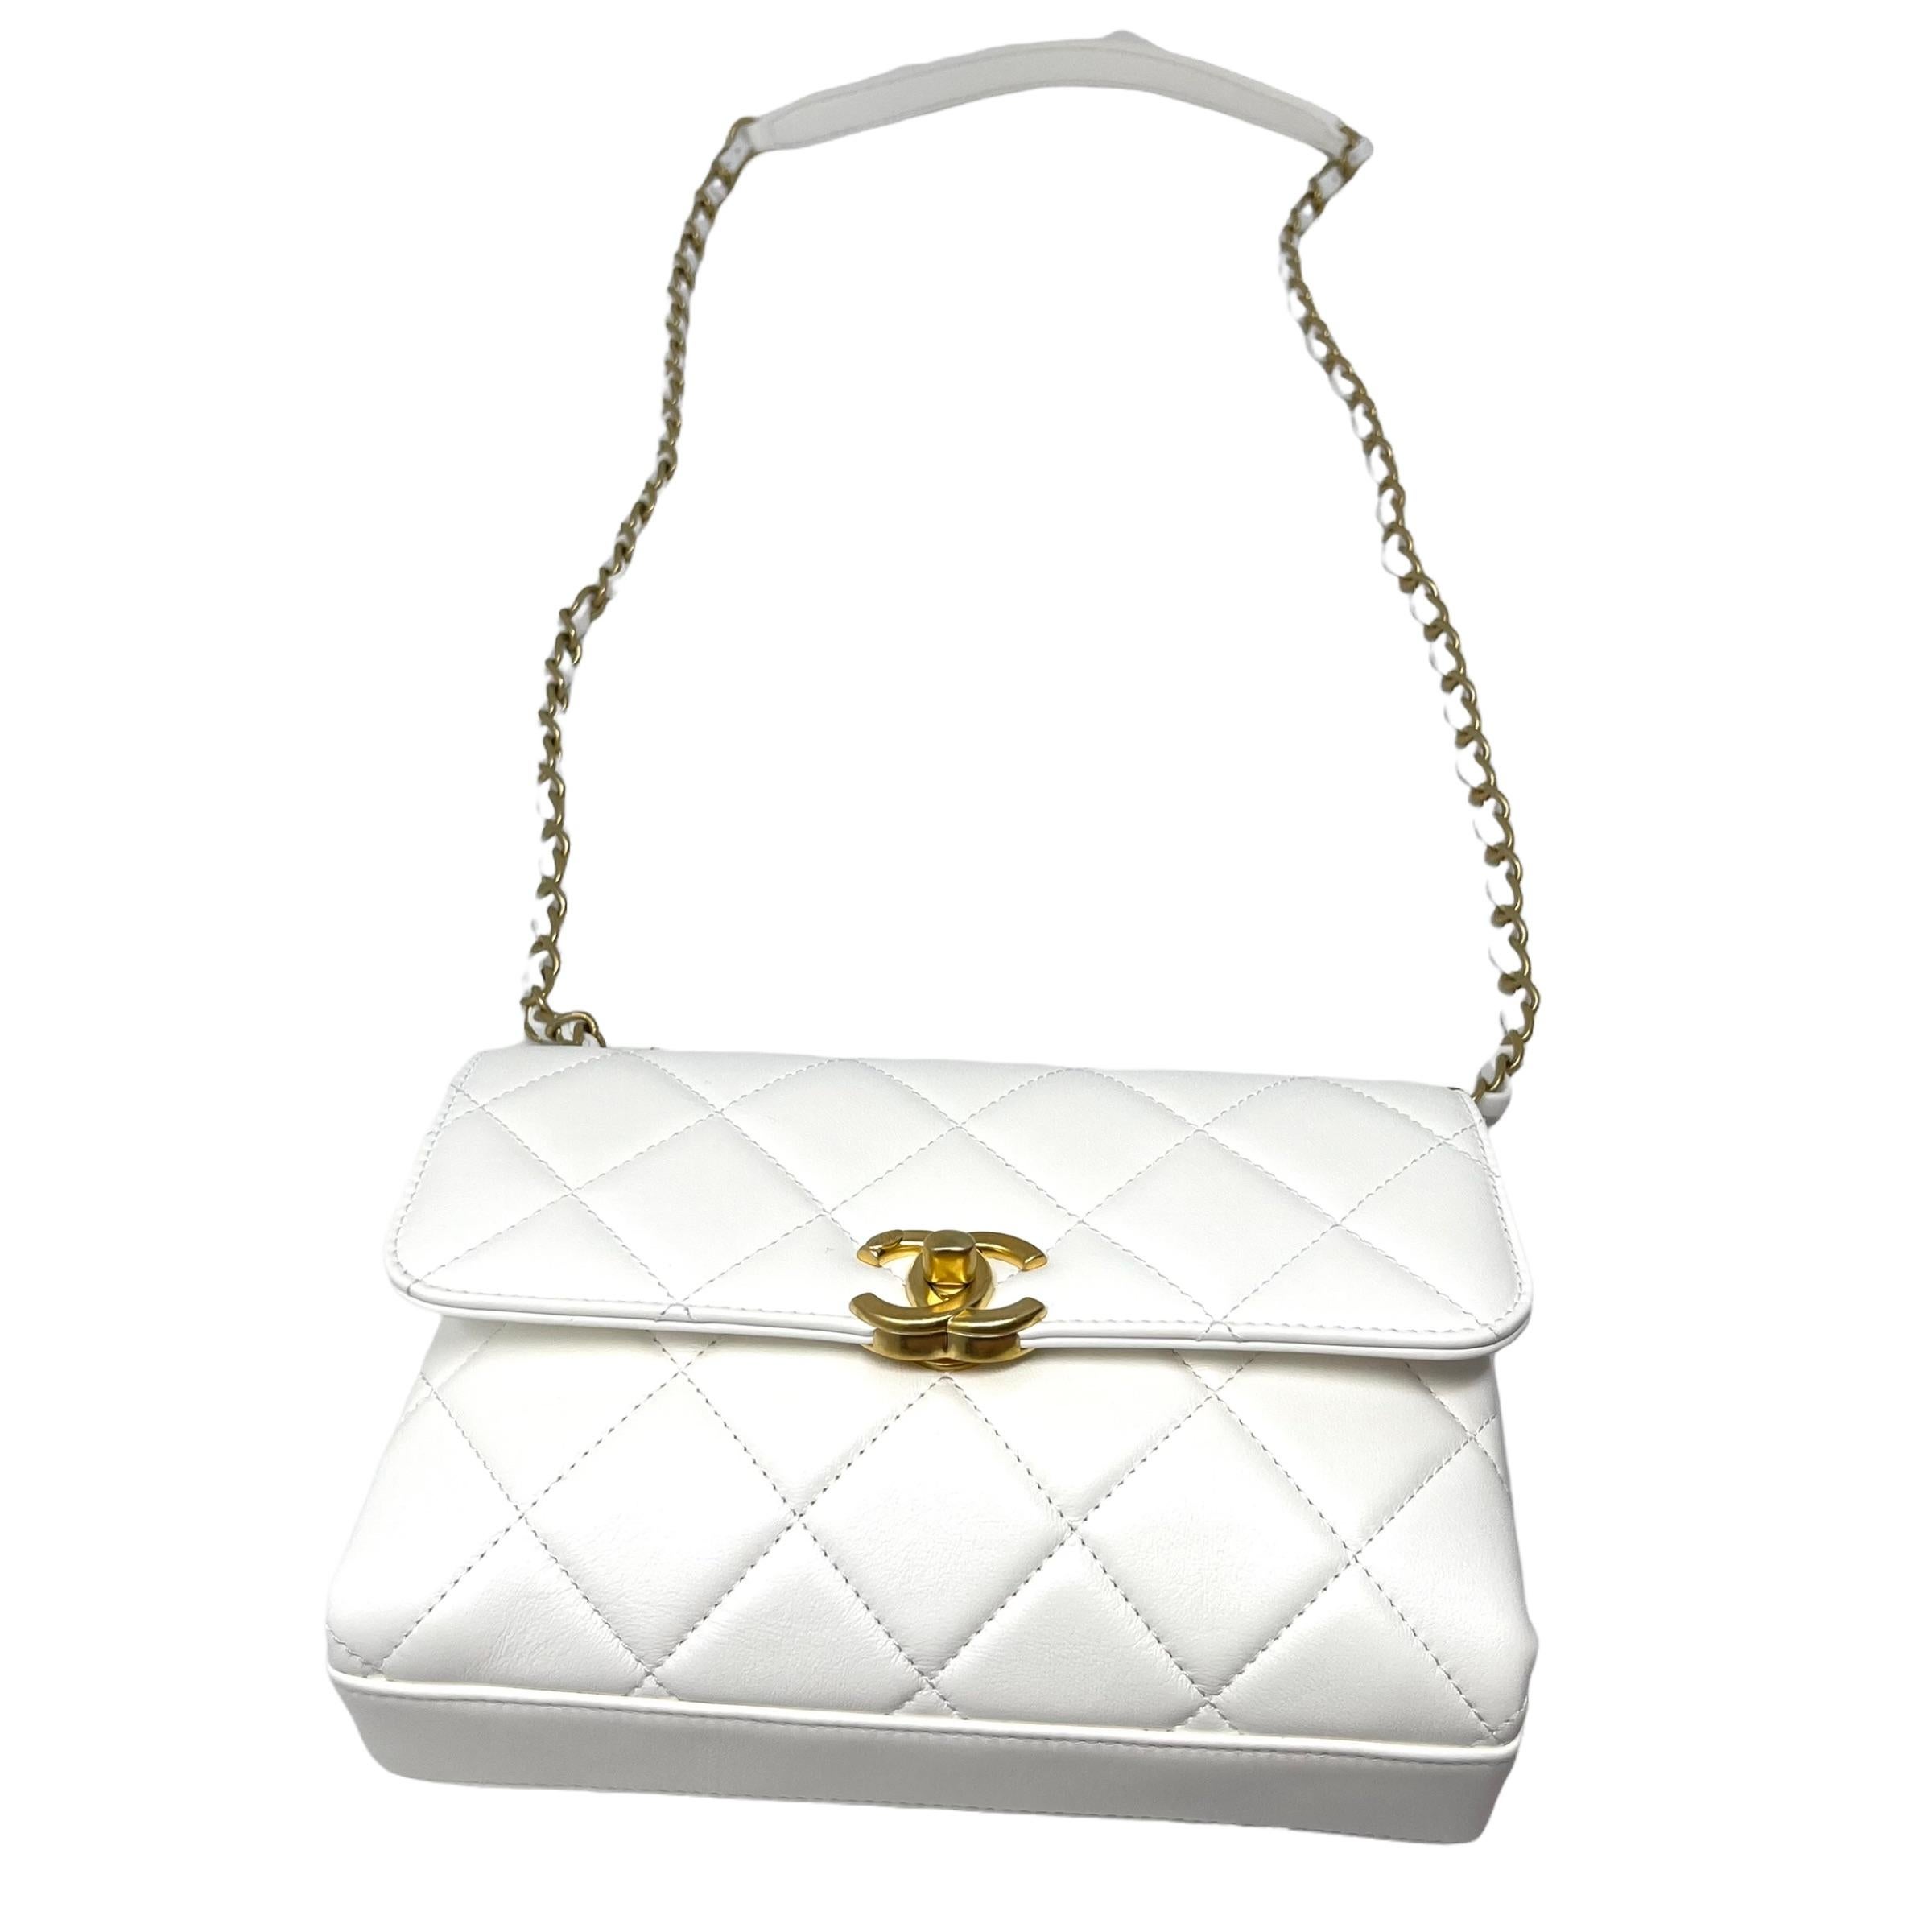 NEW Chanel White Small Flap Bag Quilted Leather Crossbody Bag For Sale 8